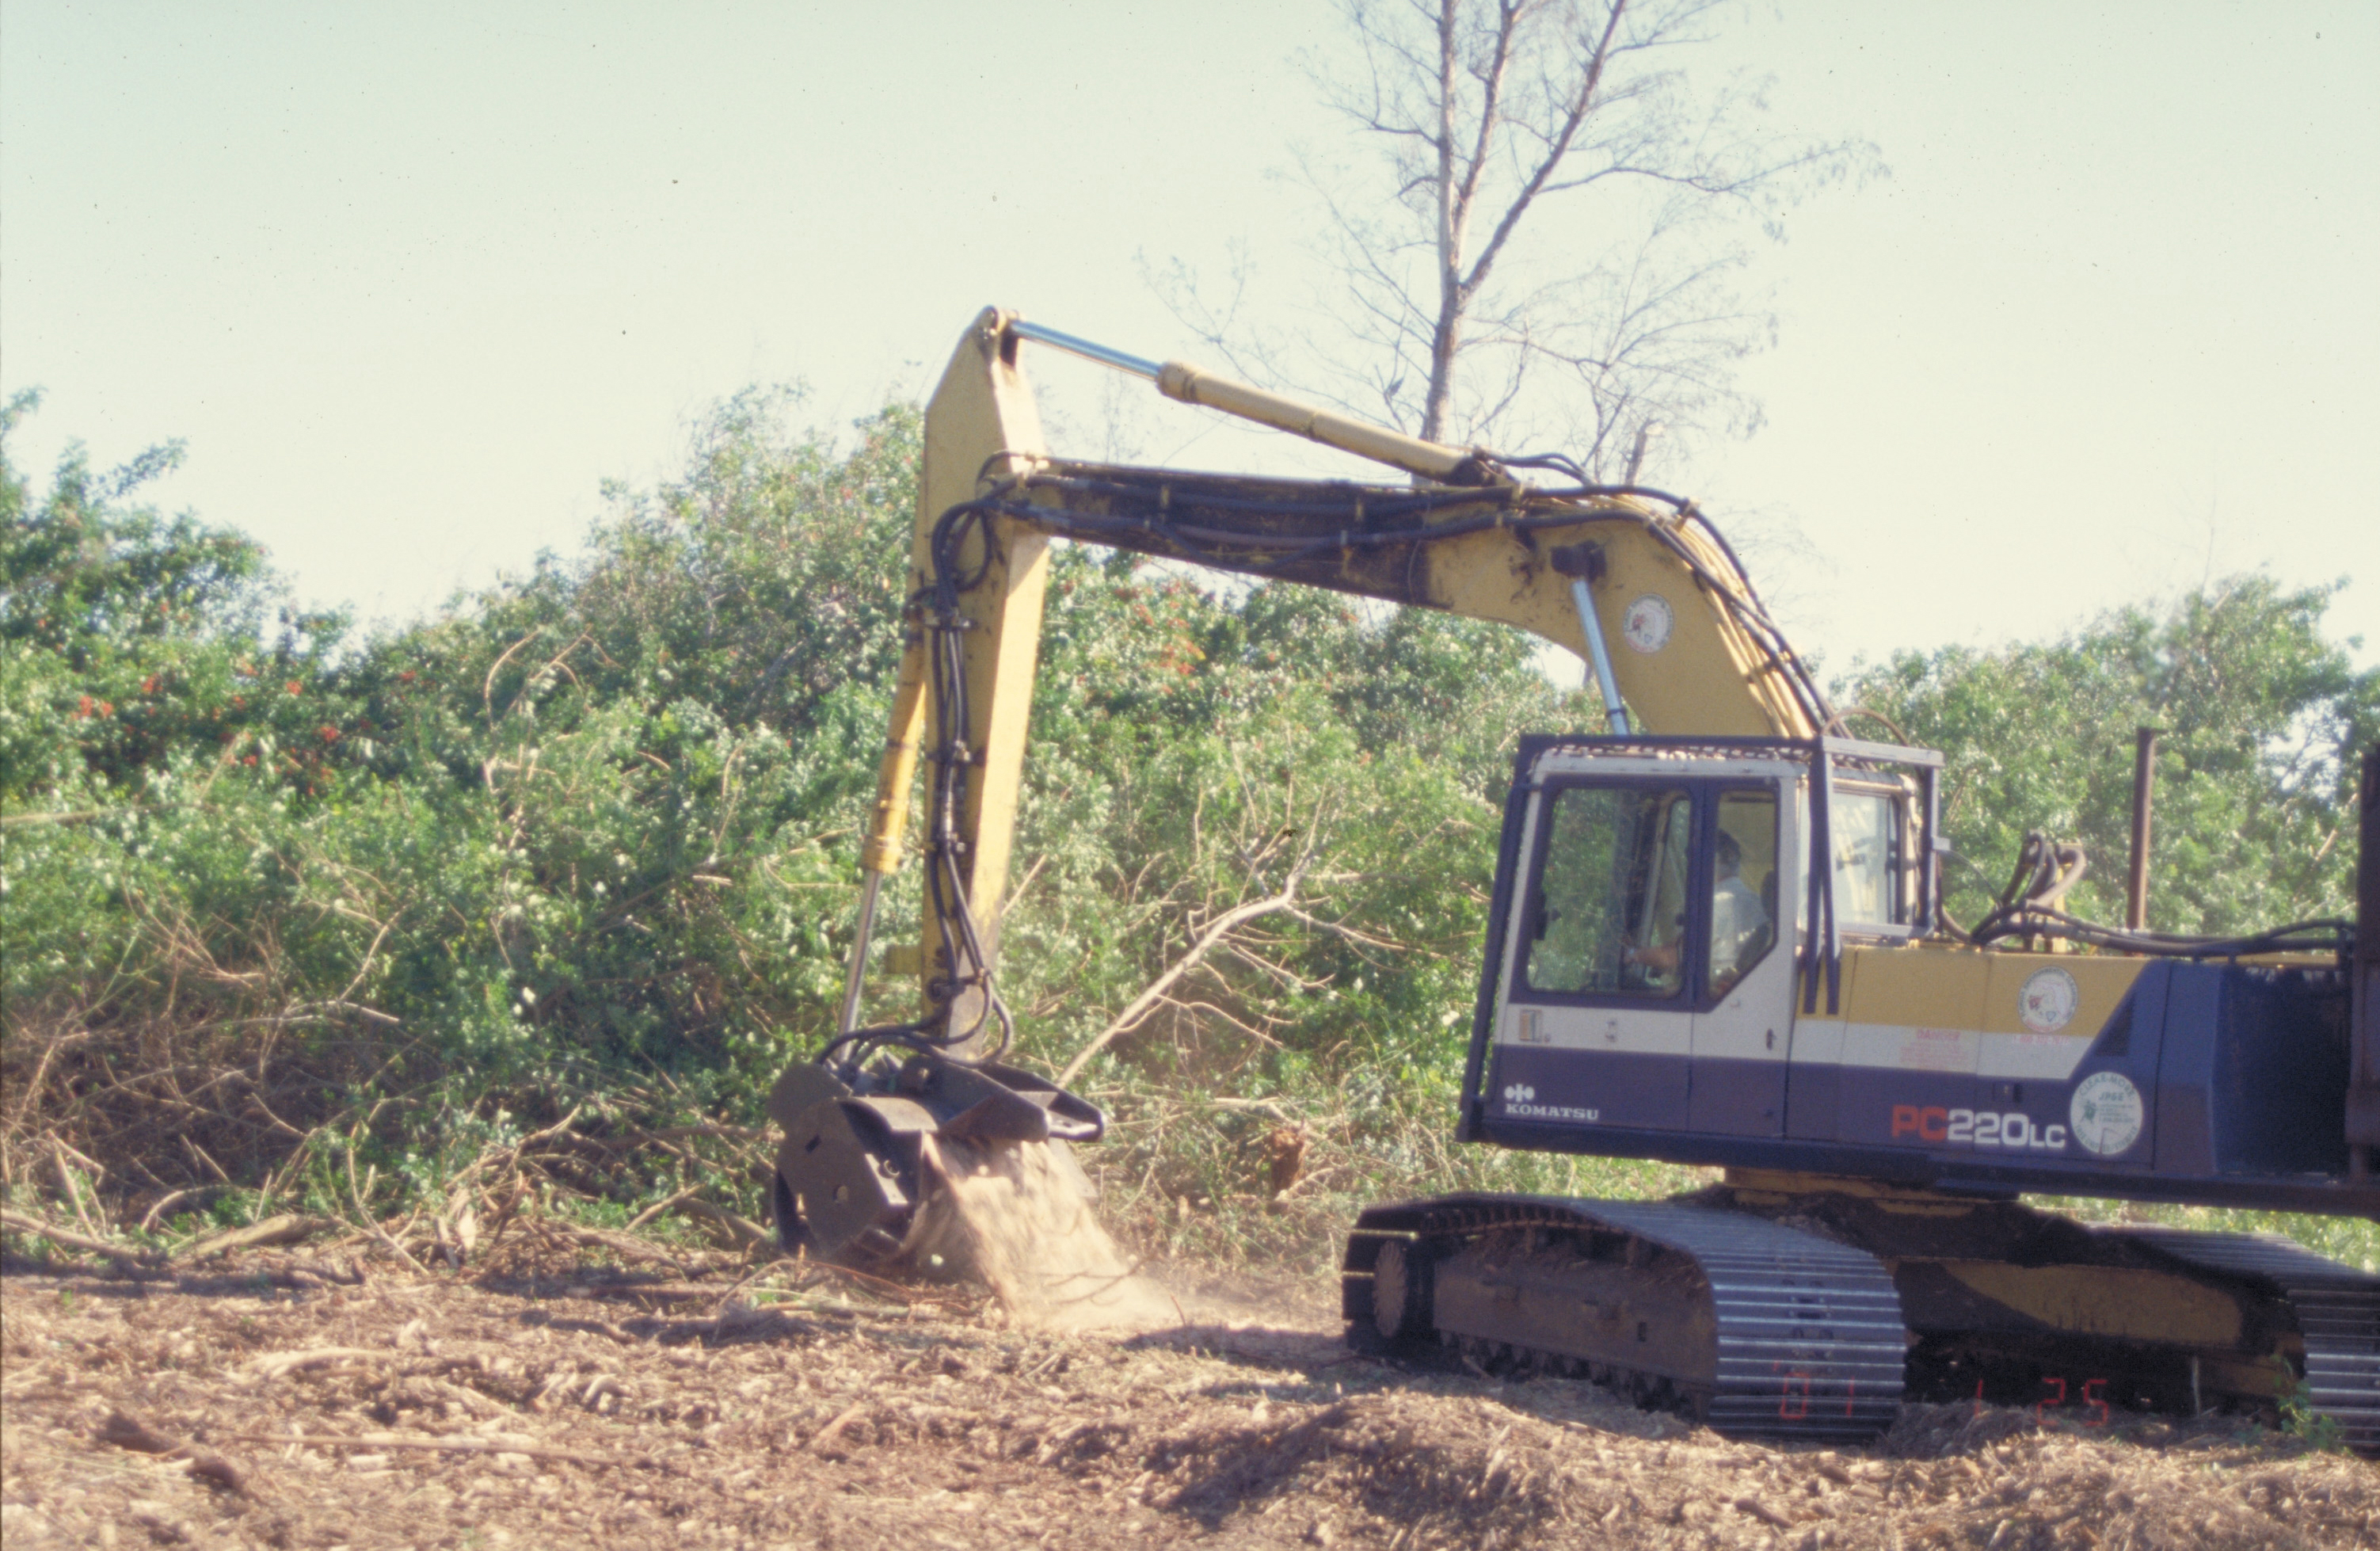 A backhoe removes invasive species from the soil.